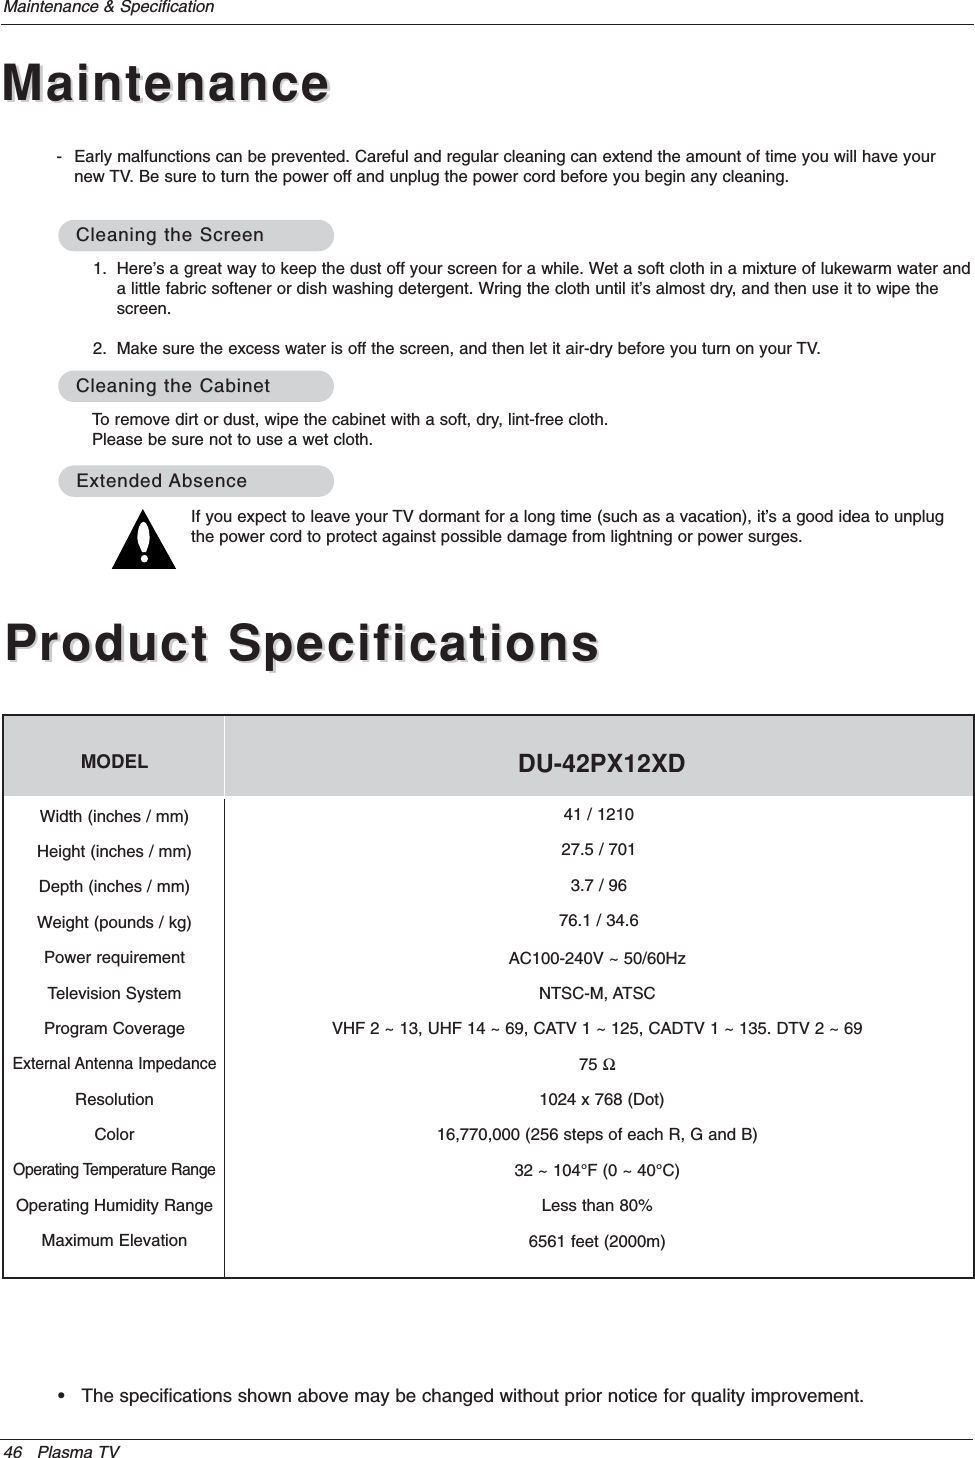 46 Plasma TVMaintenance &amp; Specification• The specifications shown above may be changed without prior notice for quality improvement.Product SpecificationsProduct SpecificationsMODELAC100-240V ~ 50/60HzNTSC-M, ATSCVHF 2 ~ 13, UHF 14 ~ 69, CATV 1 ~ 125, CADTV 1 ~ 135. DTV 2 ~ 6975 Ω1024 x 768 (Dot)                                         16,770,000 (256 steps of each R, G and B)32 ~ 104°F (0 ~ 40°C)Less than 80%6561 feet (2000m)41 / 121027.5 / 7013.7 / 9676.1 / 34.6Width (inches / mm)Height (inches / mm)Depth (inches / mm)Weight (pounds / kg)Power requirementTelevision SystemProgram CoverageExternal Antenna ImpedanceResolutionColorOperating Temperature RangeOperating Humidity RangeMaximum ElevationDU-42PX12XD1. Here’s a great way to keep the dust off your screen for a while. Wet a soft cloth in a mixture of lukewarm water anda little fabric softener or dish washing detergent. Wring the cloth until it’s almost dry, and then use it to wipe thescreen.2. Make sure the excess water is off the screen, and then let it air-dry before you turn on your TV.To remove dirt or dust, wipe the cabinet with a soft, dry, lint-free cloth.Please be sure not to use a wet cloth.If you expect to leave your TV dormant for a long time (such as a vacation), it’s a good idea to unplugthe power cord to protect against possible damage from lightning or power surges.- Early malfunctions can be prevented. Careful and regular cleaning can extend the amount of time you will have yournew TV. Be sure to turn the power off and unplug the power cord before you begin any cleaning.Cleaning the ScreenCleaning the ScreenCleaning the CabinetCleaning the CabinetExtendedExtended AbsenceAbsenceMaintenanceMaintenance